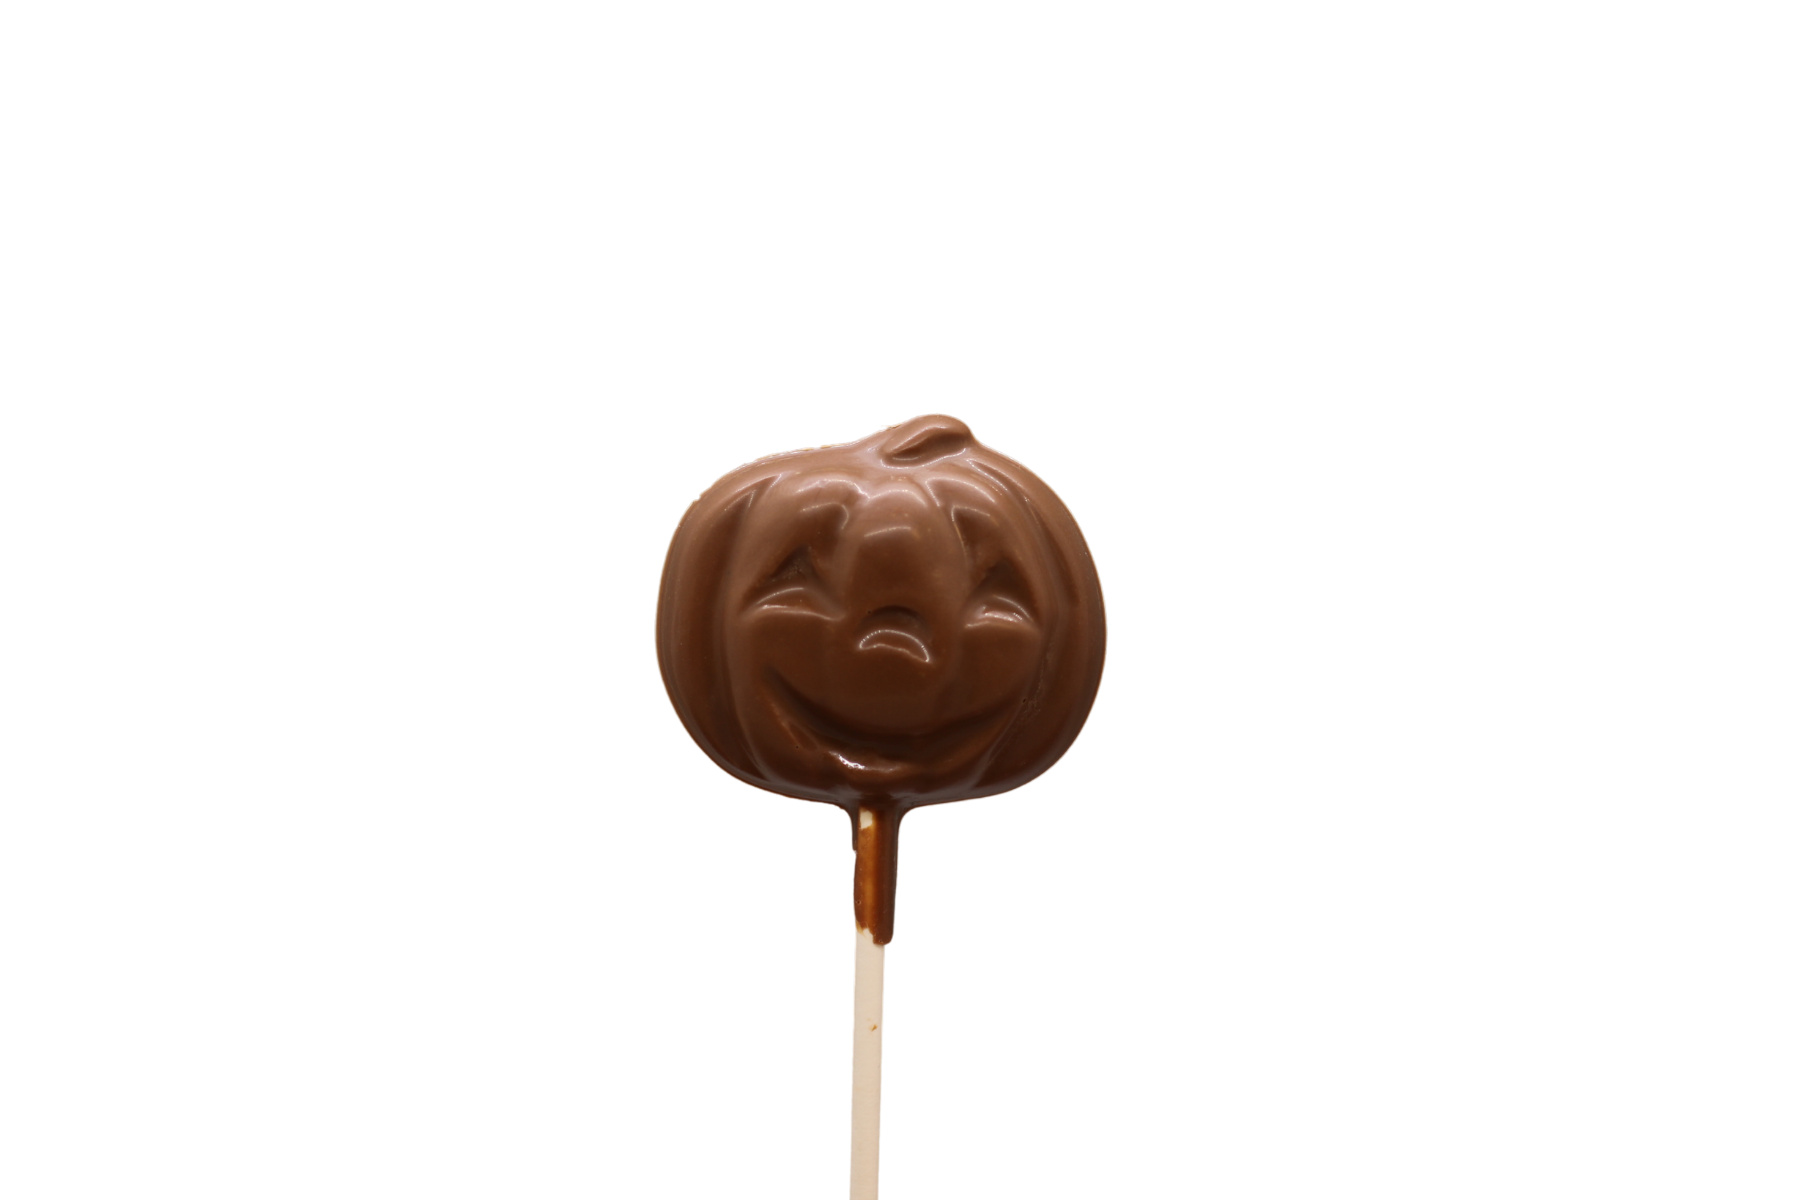 Experience the enchantment of our Milk Chocolate Smiling Pumpkin Pop on a festive stick – a sweet and festive delight for your Halloween celebrations!